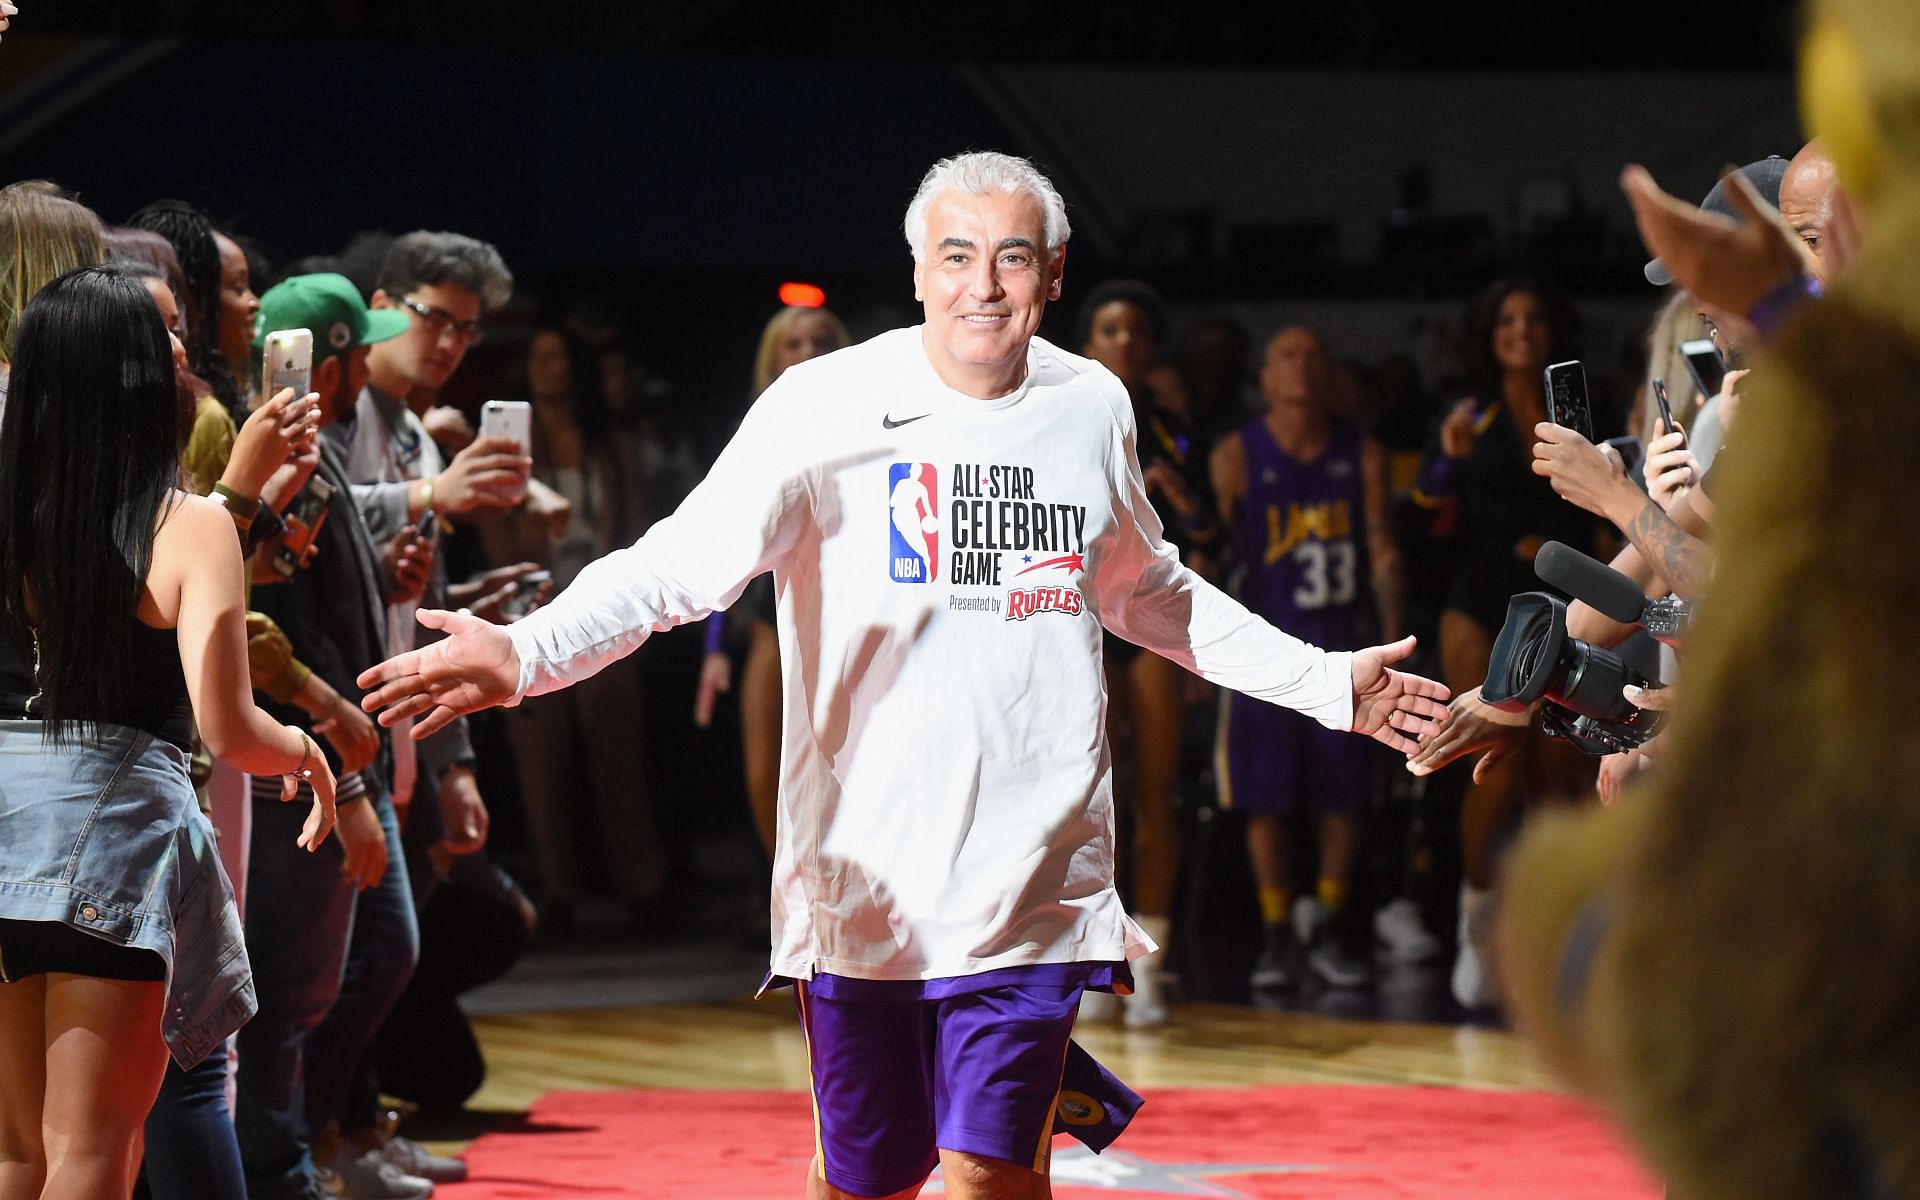 Lasry participated in the 2019 NBA All-Star Celebrity Game (Image via Getty Images)